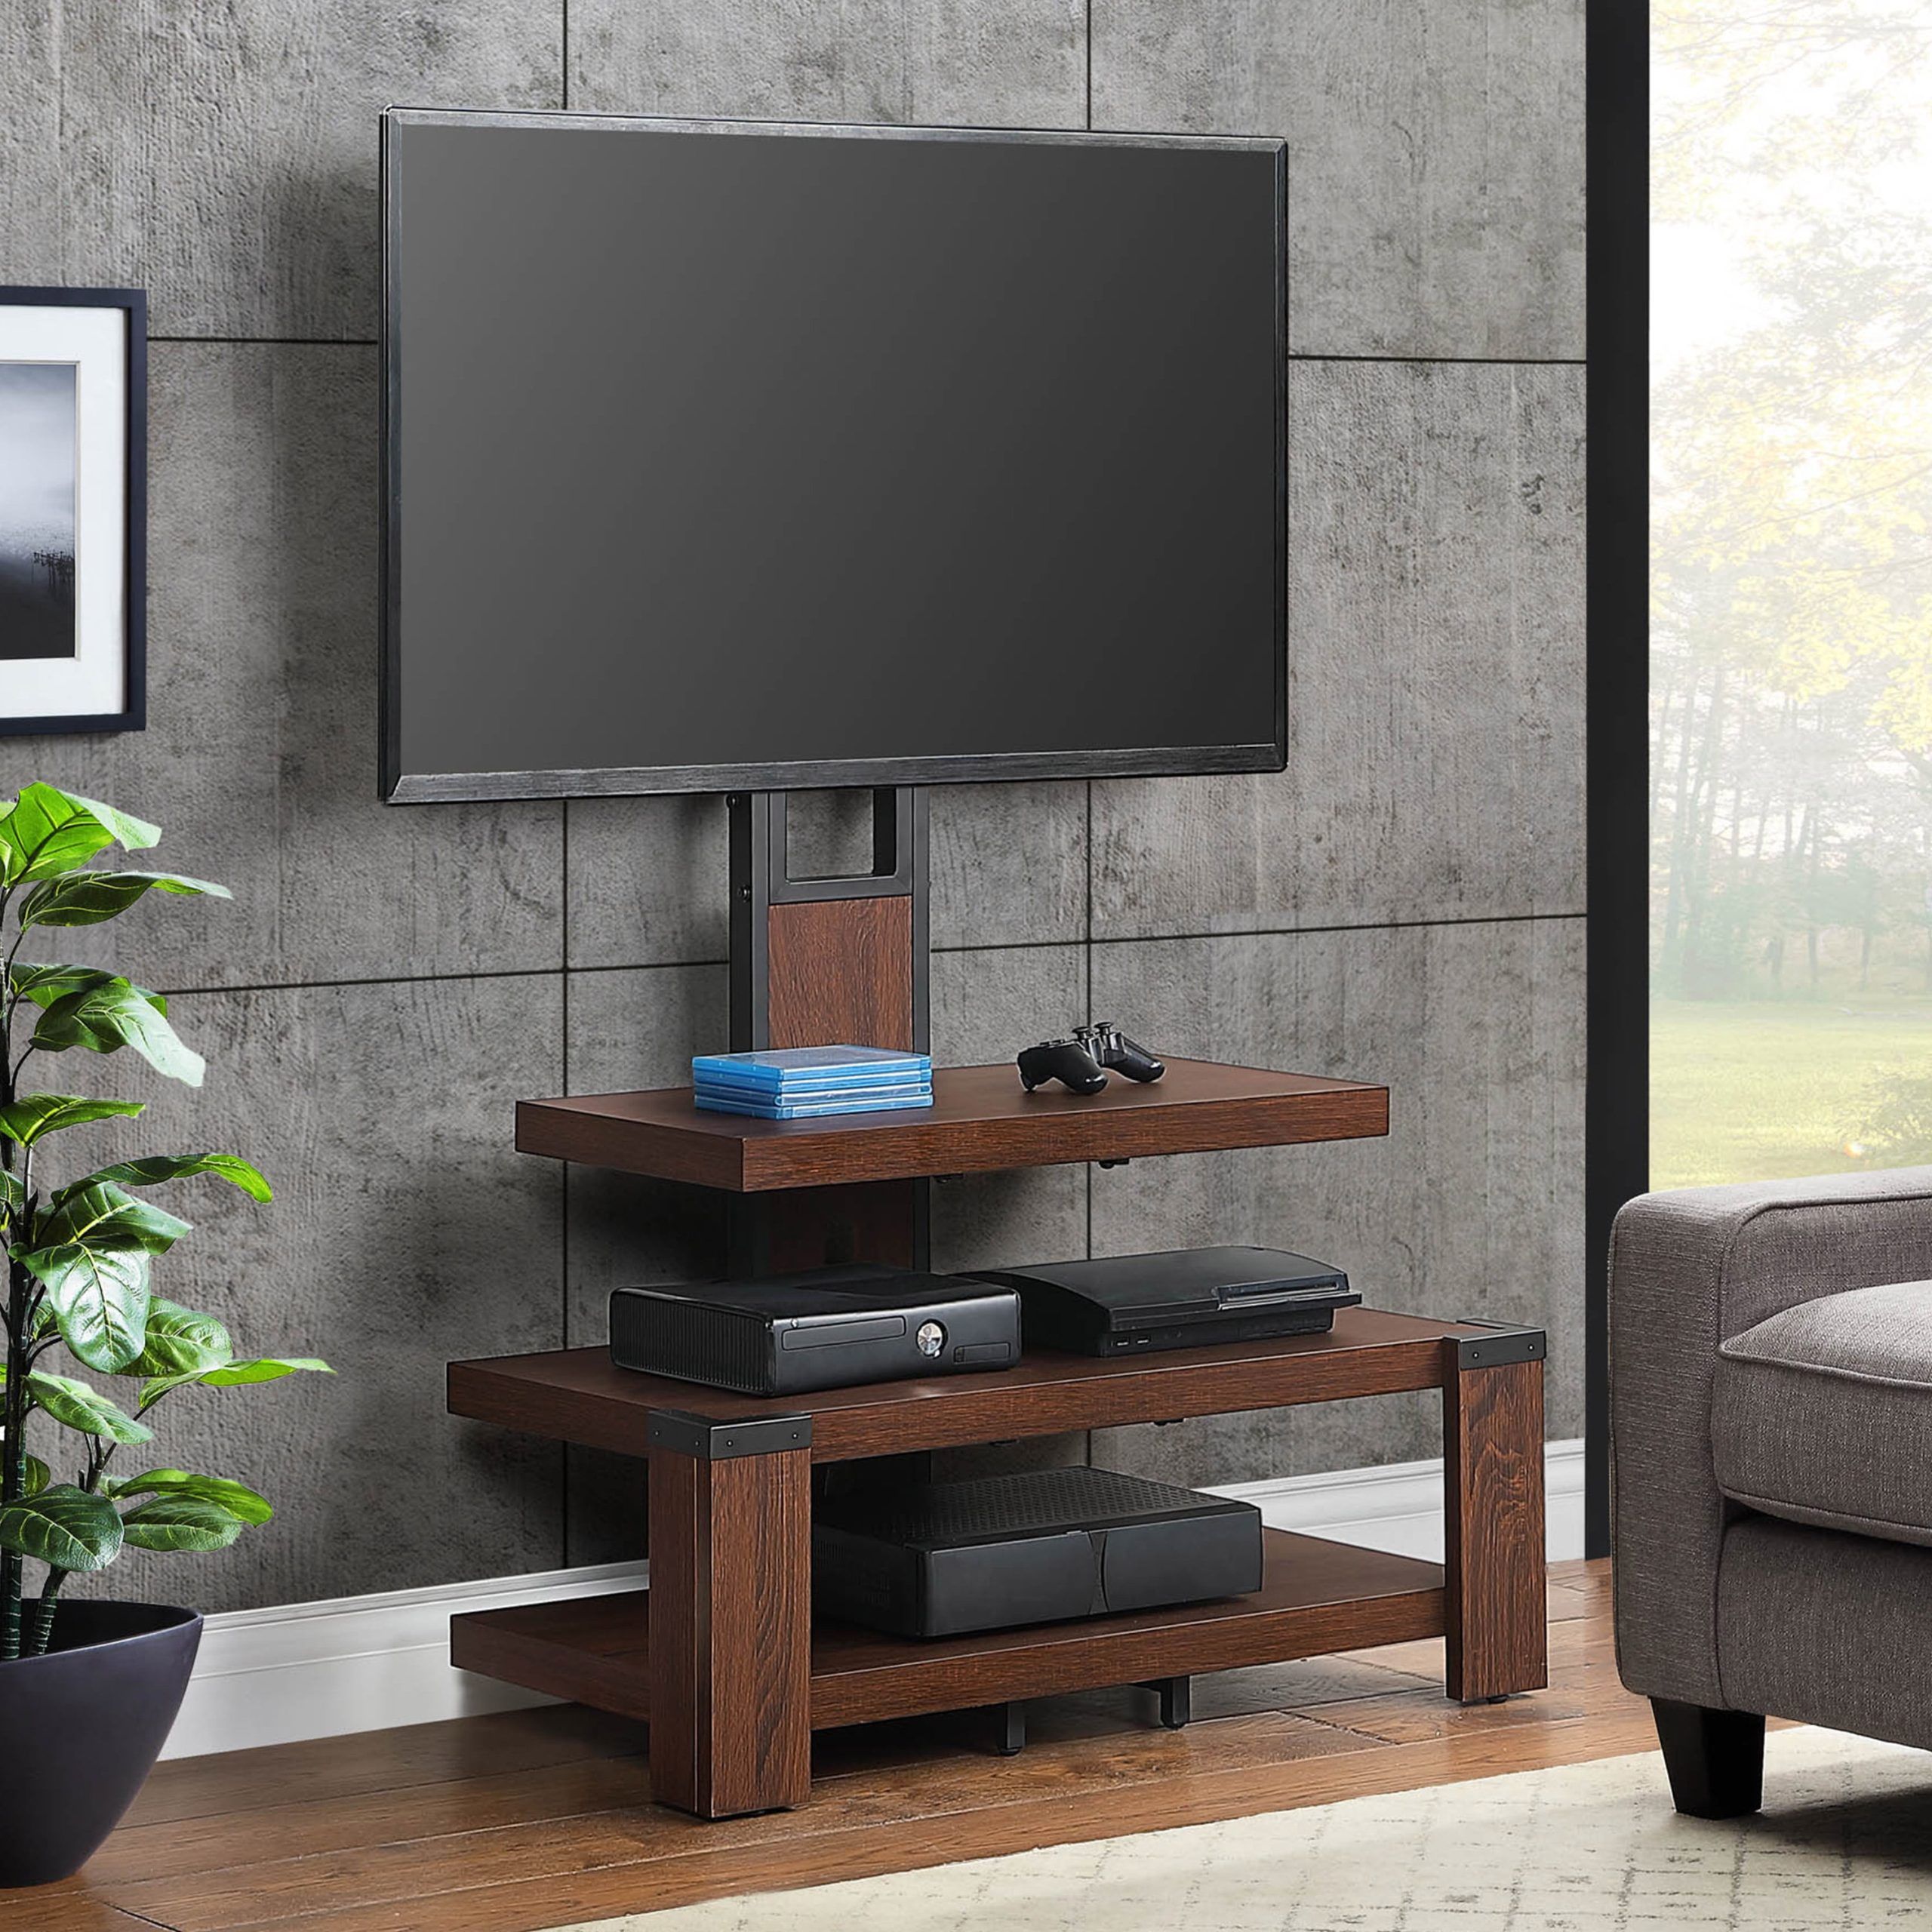 Whalen 3 Shelf Television Stand With Floater Mount For Tvs Up To 55 Inside Glass Shelves Tv Stands (Gallery 17 of 20)